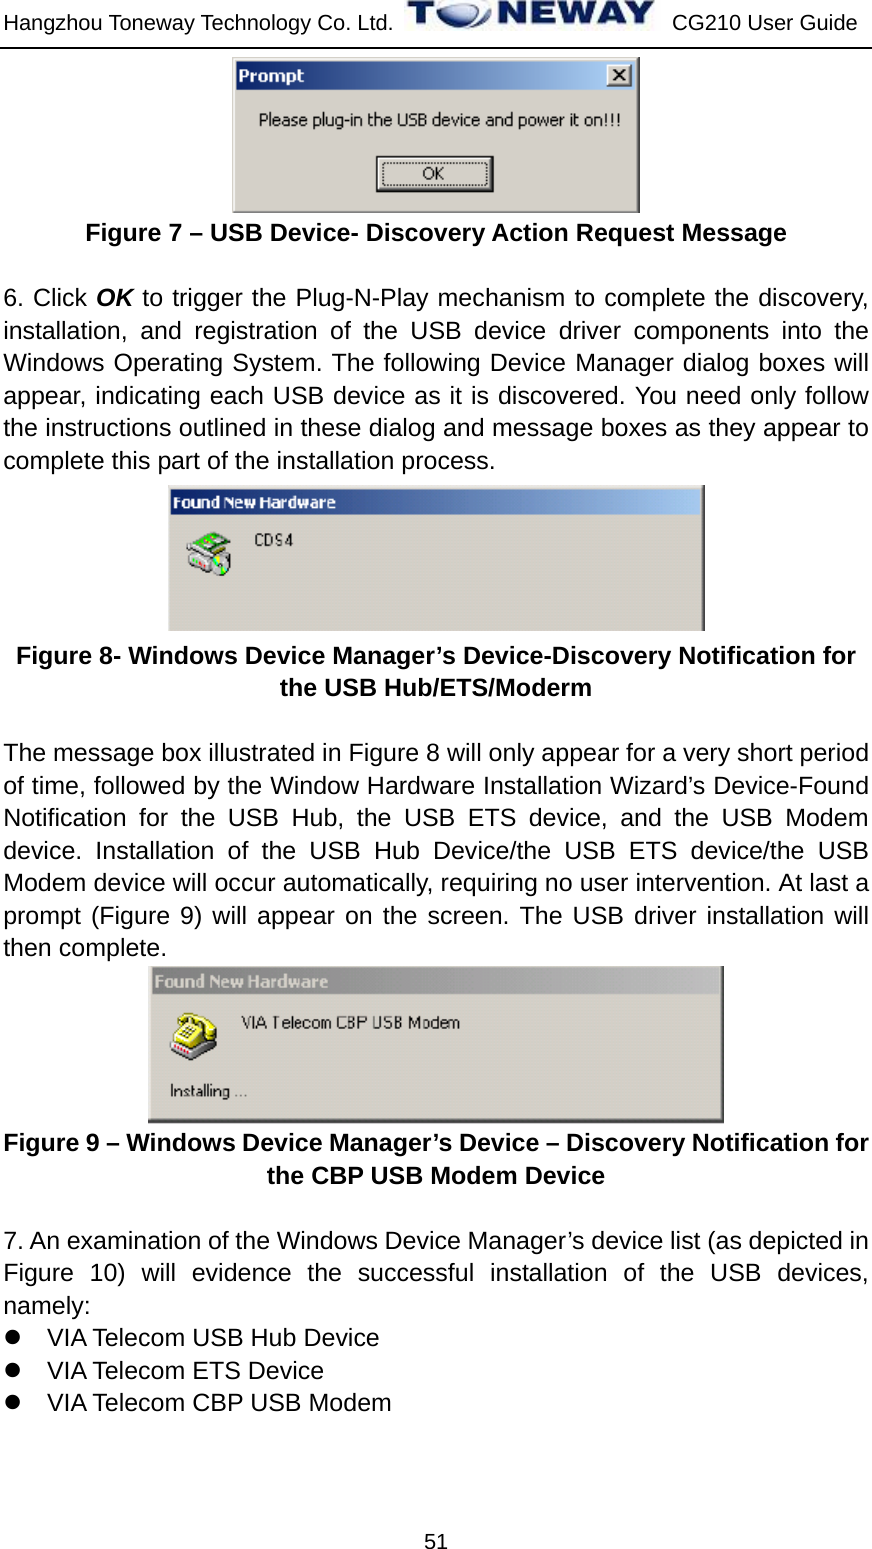 Hangzhou Toneway Technology Co. Ltd.    CG210 User Guide 51  Figure 7 – USB Device- Discovery Action Request Message  6. Click OK to trigger the Plug-N-Play mechanism to complete the discovery, installation, and registration of the USB device driver components into the Windows Operating System. The following Device Manager dialog boxes will appear, indicating each USB device as it is discovered. You need only follow the instructions outlined in these dialog and message boxes as they appear to complete this part of the installation process.  Figure 8- Windows Device Manager’s Device-Discovery Notification for the USB Hub/ETS/Moderm  The message box illustrated in Figure 8 will only appear for a very short period of time, followed by the Window Hardware Installation Wizard’s Device-Found Notification for the USB Hub, the USB ETS device, and the USB Modem device. Installation of the USB Hub Device/the USB ETS device/the USB Modem device will occur automatically, requiring no user intervention. At last a prompt (Figure 9) will appear on the screen. The USB driver installation will then complete.  Figure 9 – Windows Device Manager’s Device – Discovery Notification for the CBP USB Modem Device  7. An examination of the Windows Device Manager’s device list (as depicted in Figure 10) will evidence the successful installation of the USB devices, namely: z  VIA Telecom USB Hub Device z  VIA Telecom ETS Device z  VIA Telecom CBP USB Modem 